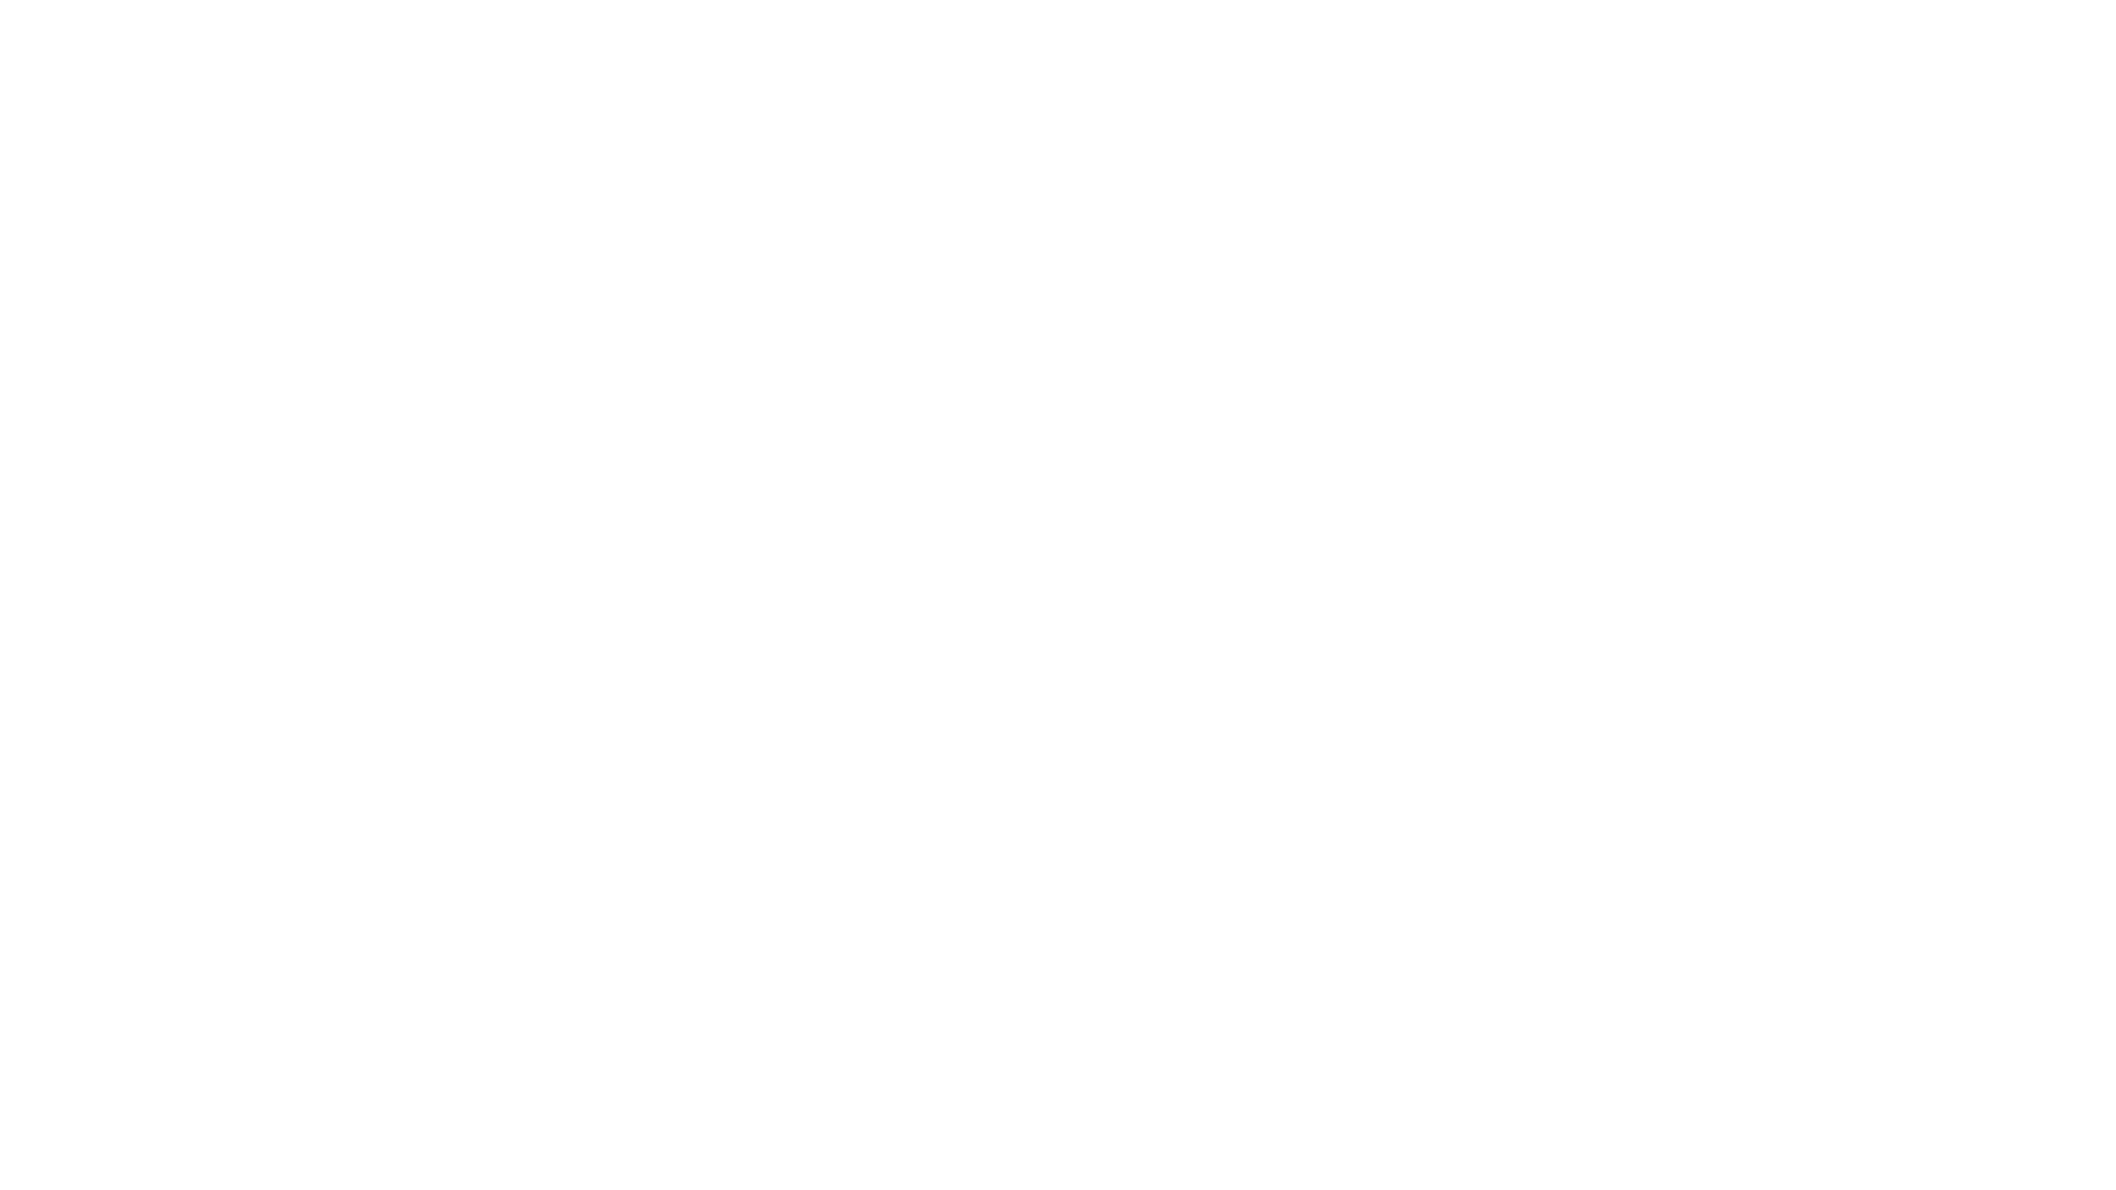 Space Center Houston - Manned Space Flight Education Foundation